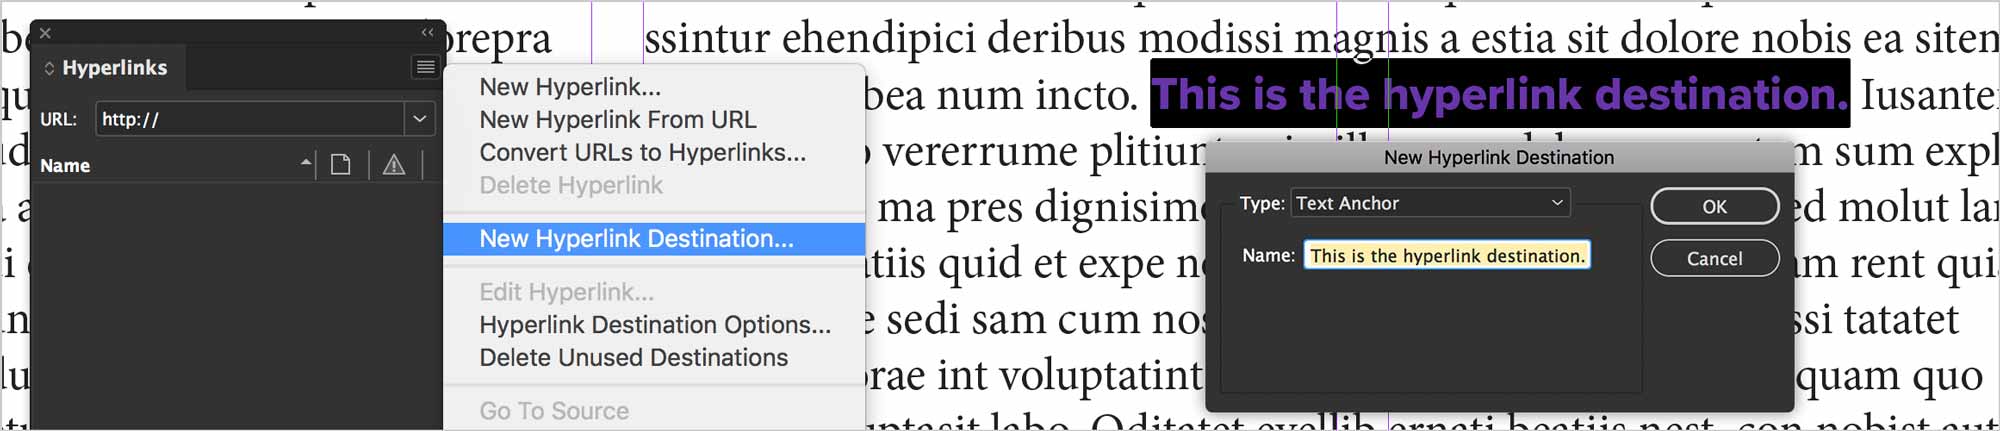 indesign-text-anchor-exercise